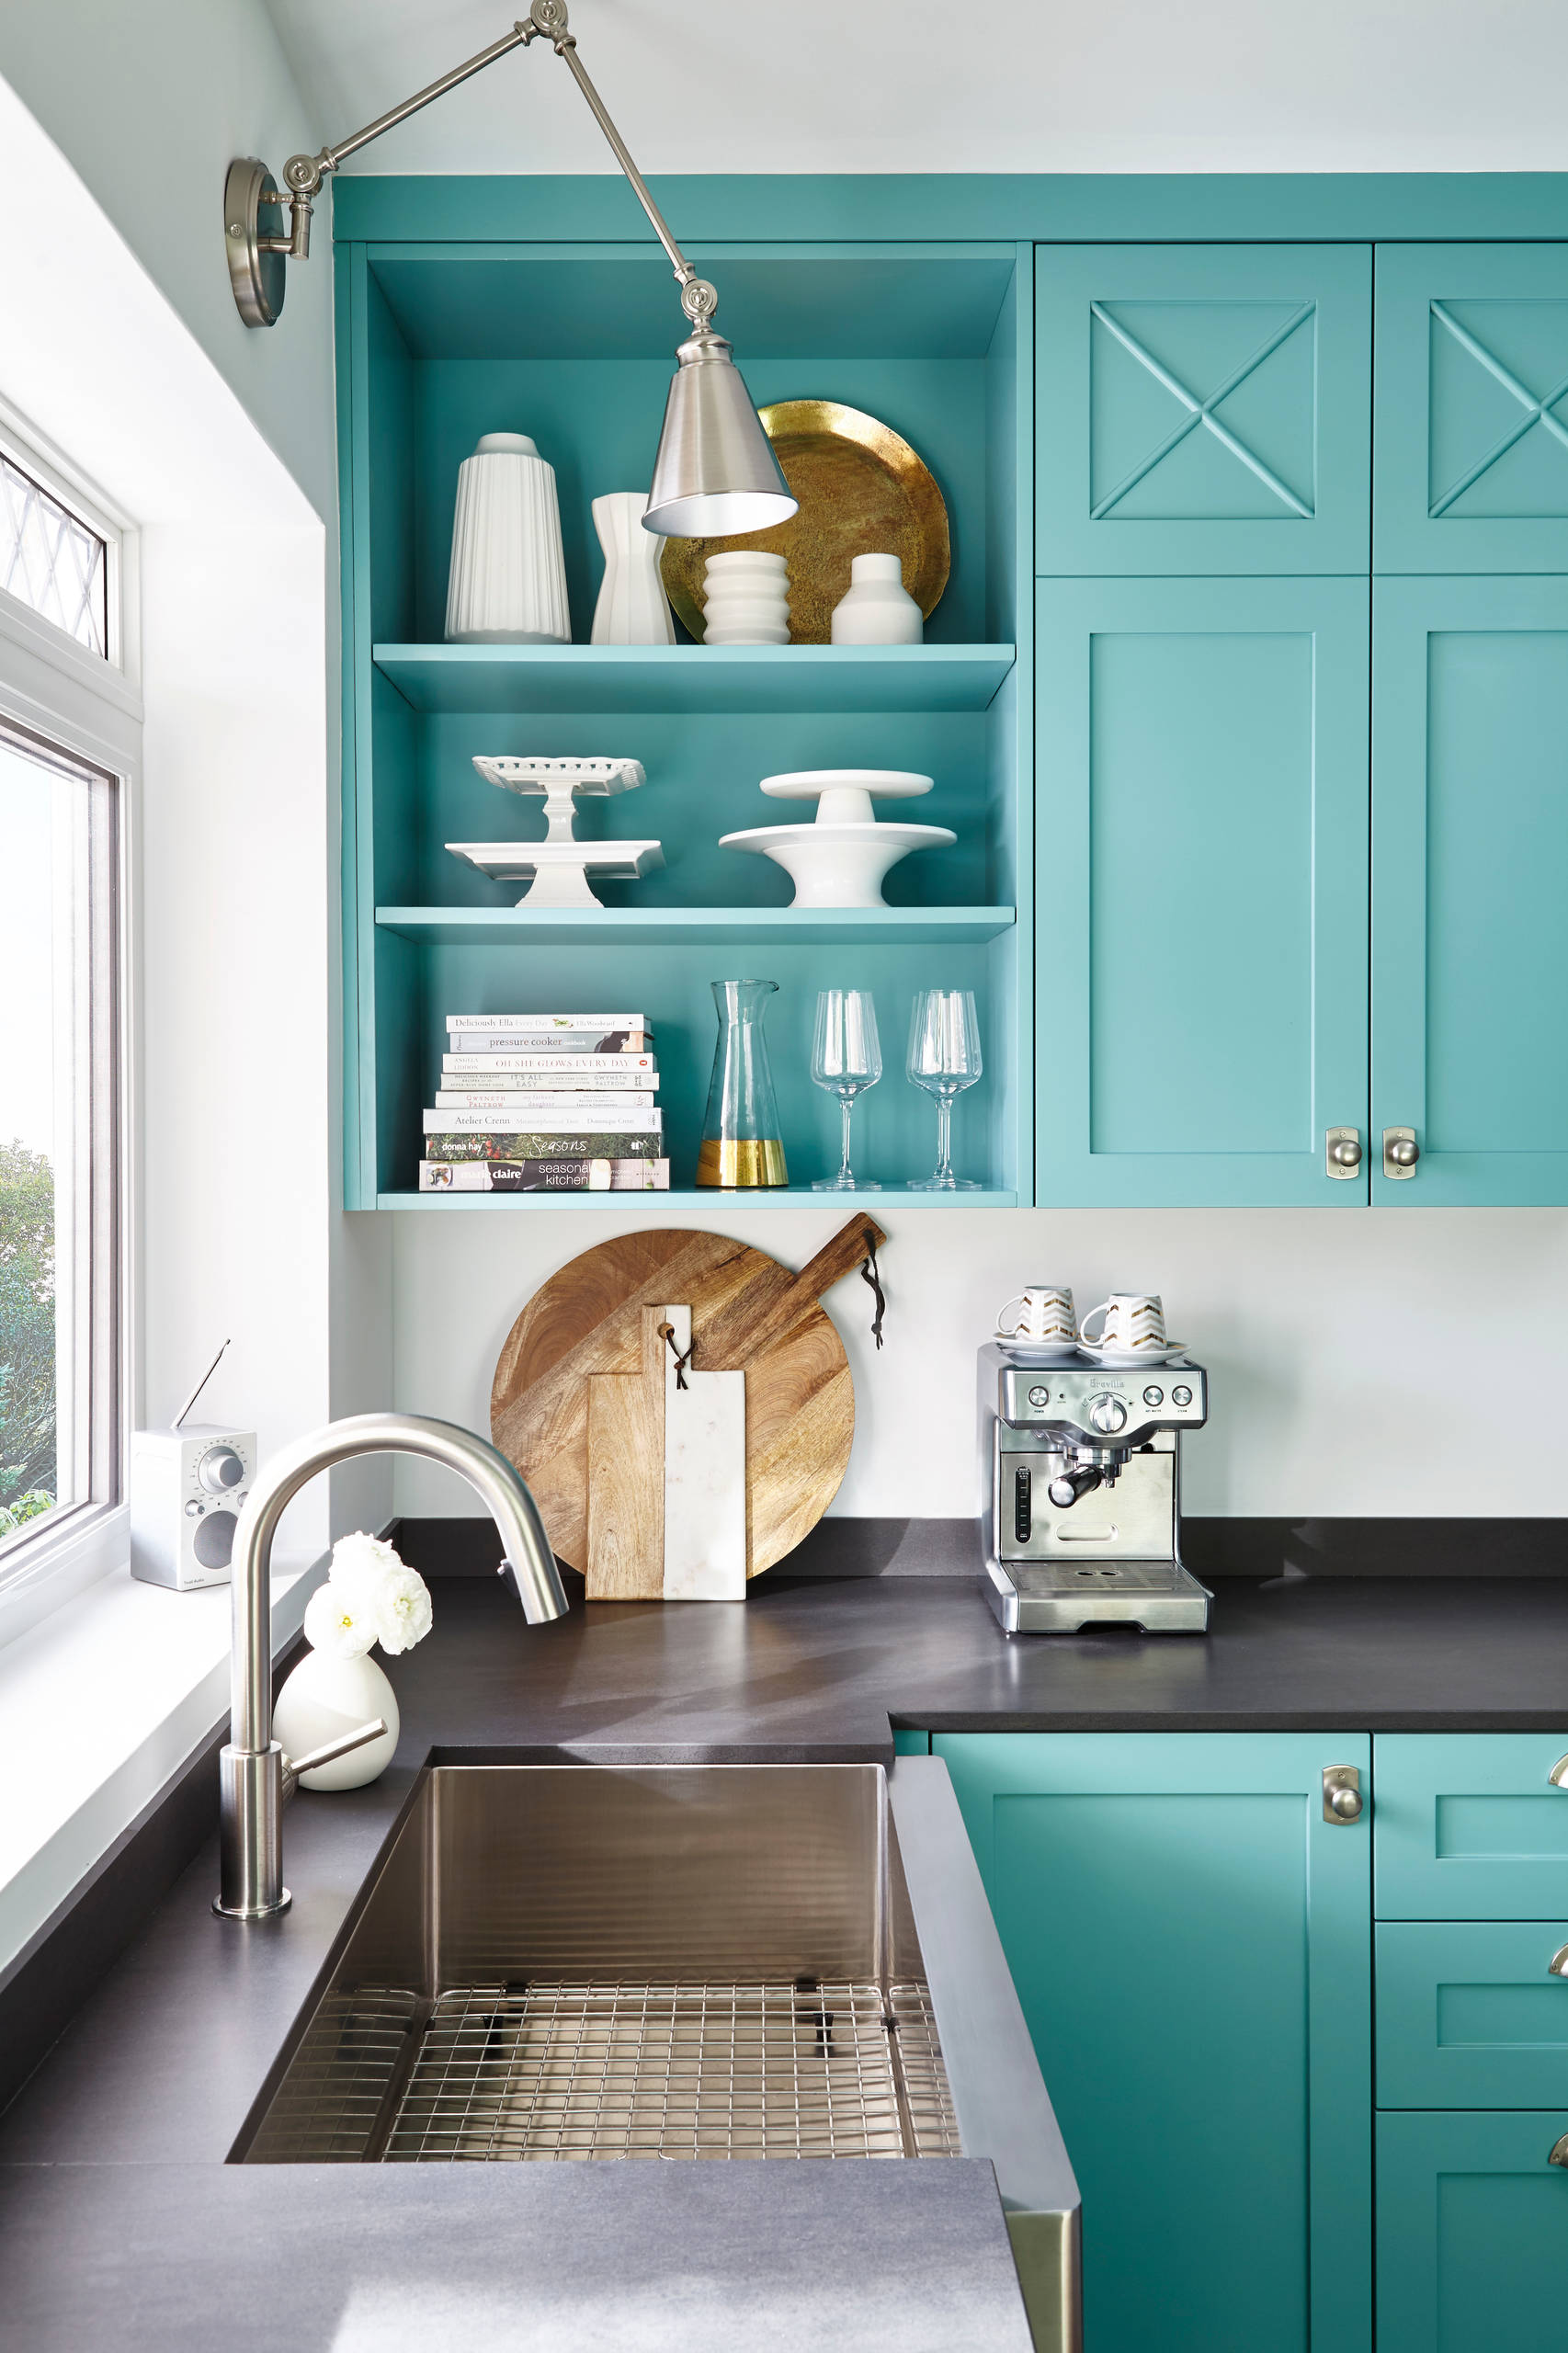 75 Turquoise Kitchen Ideas You'll Love - February, 2022 | Houzz